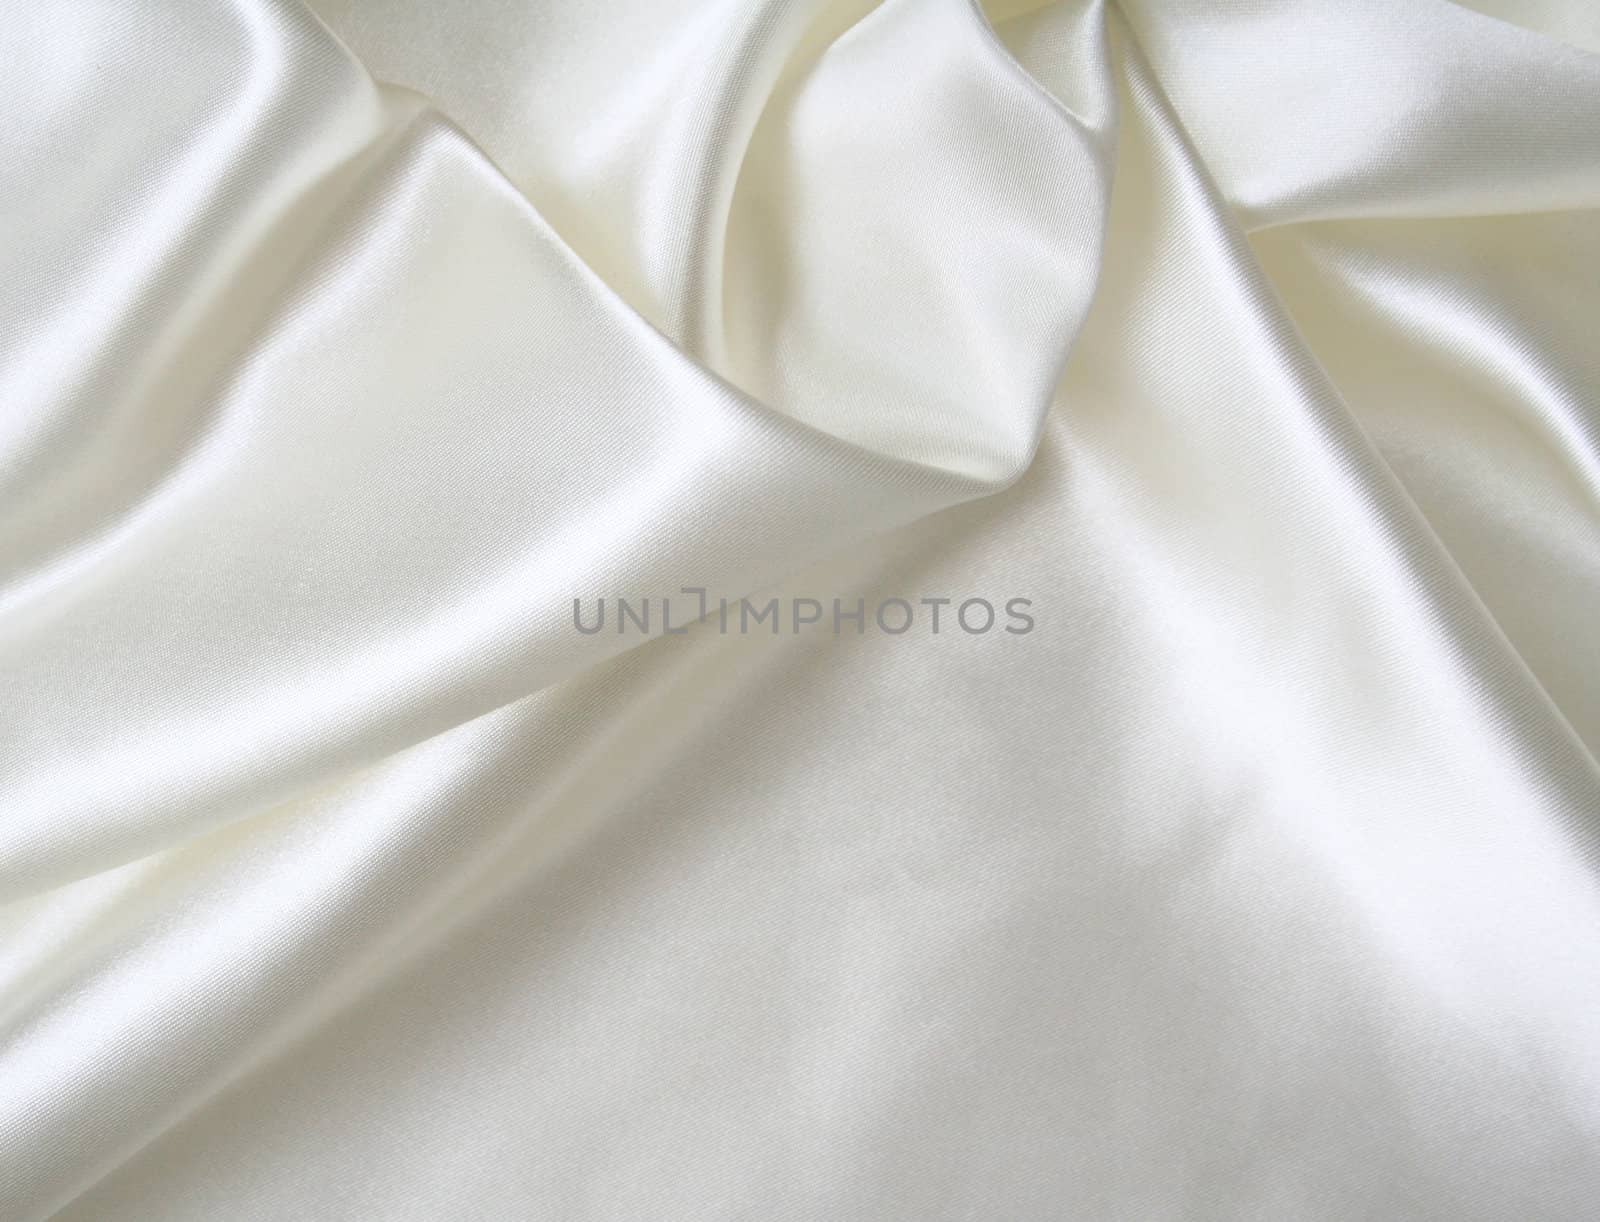 Smooth elegant white silk can use as background

